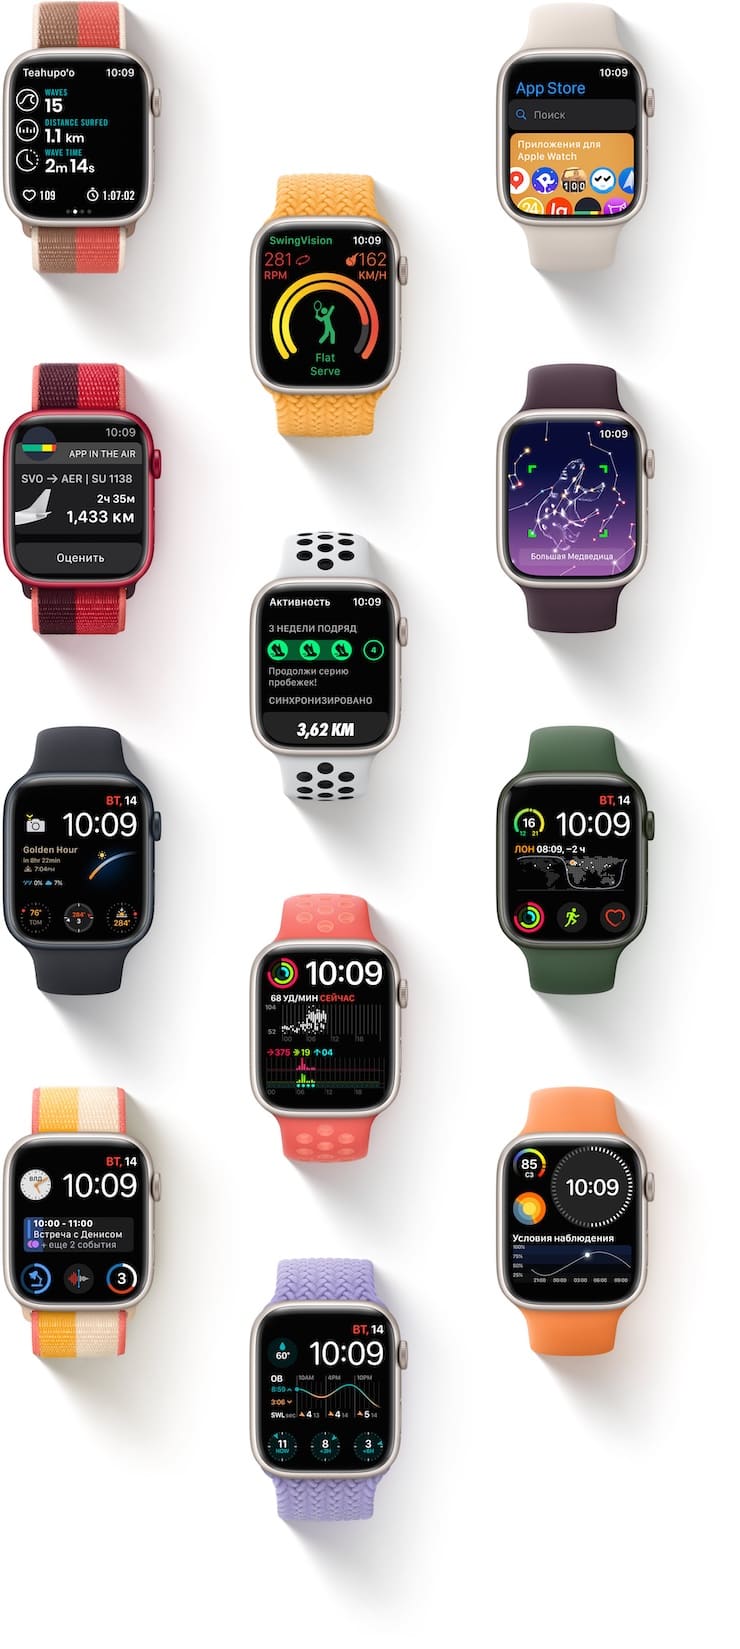 Apple Watch faces